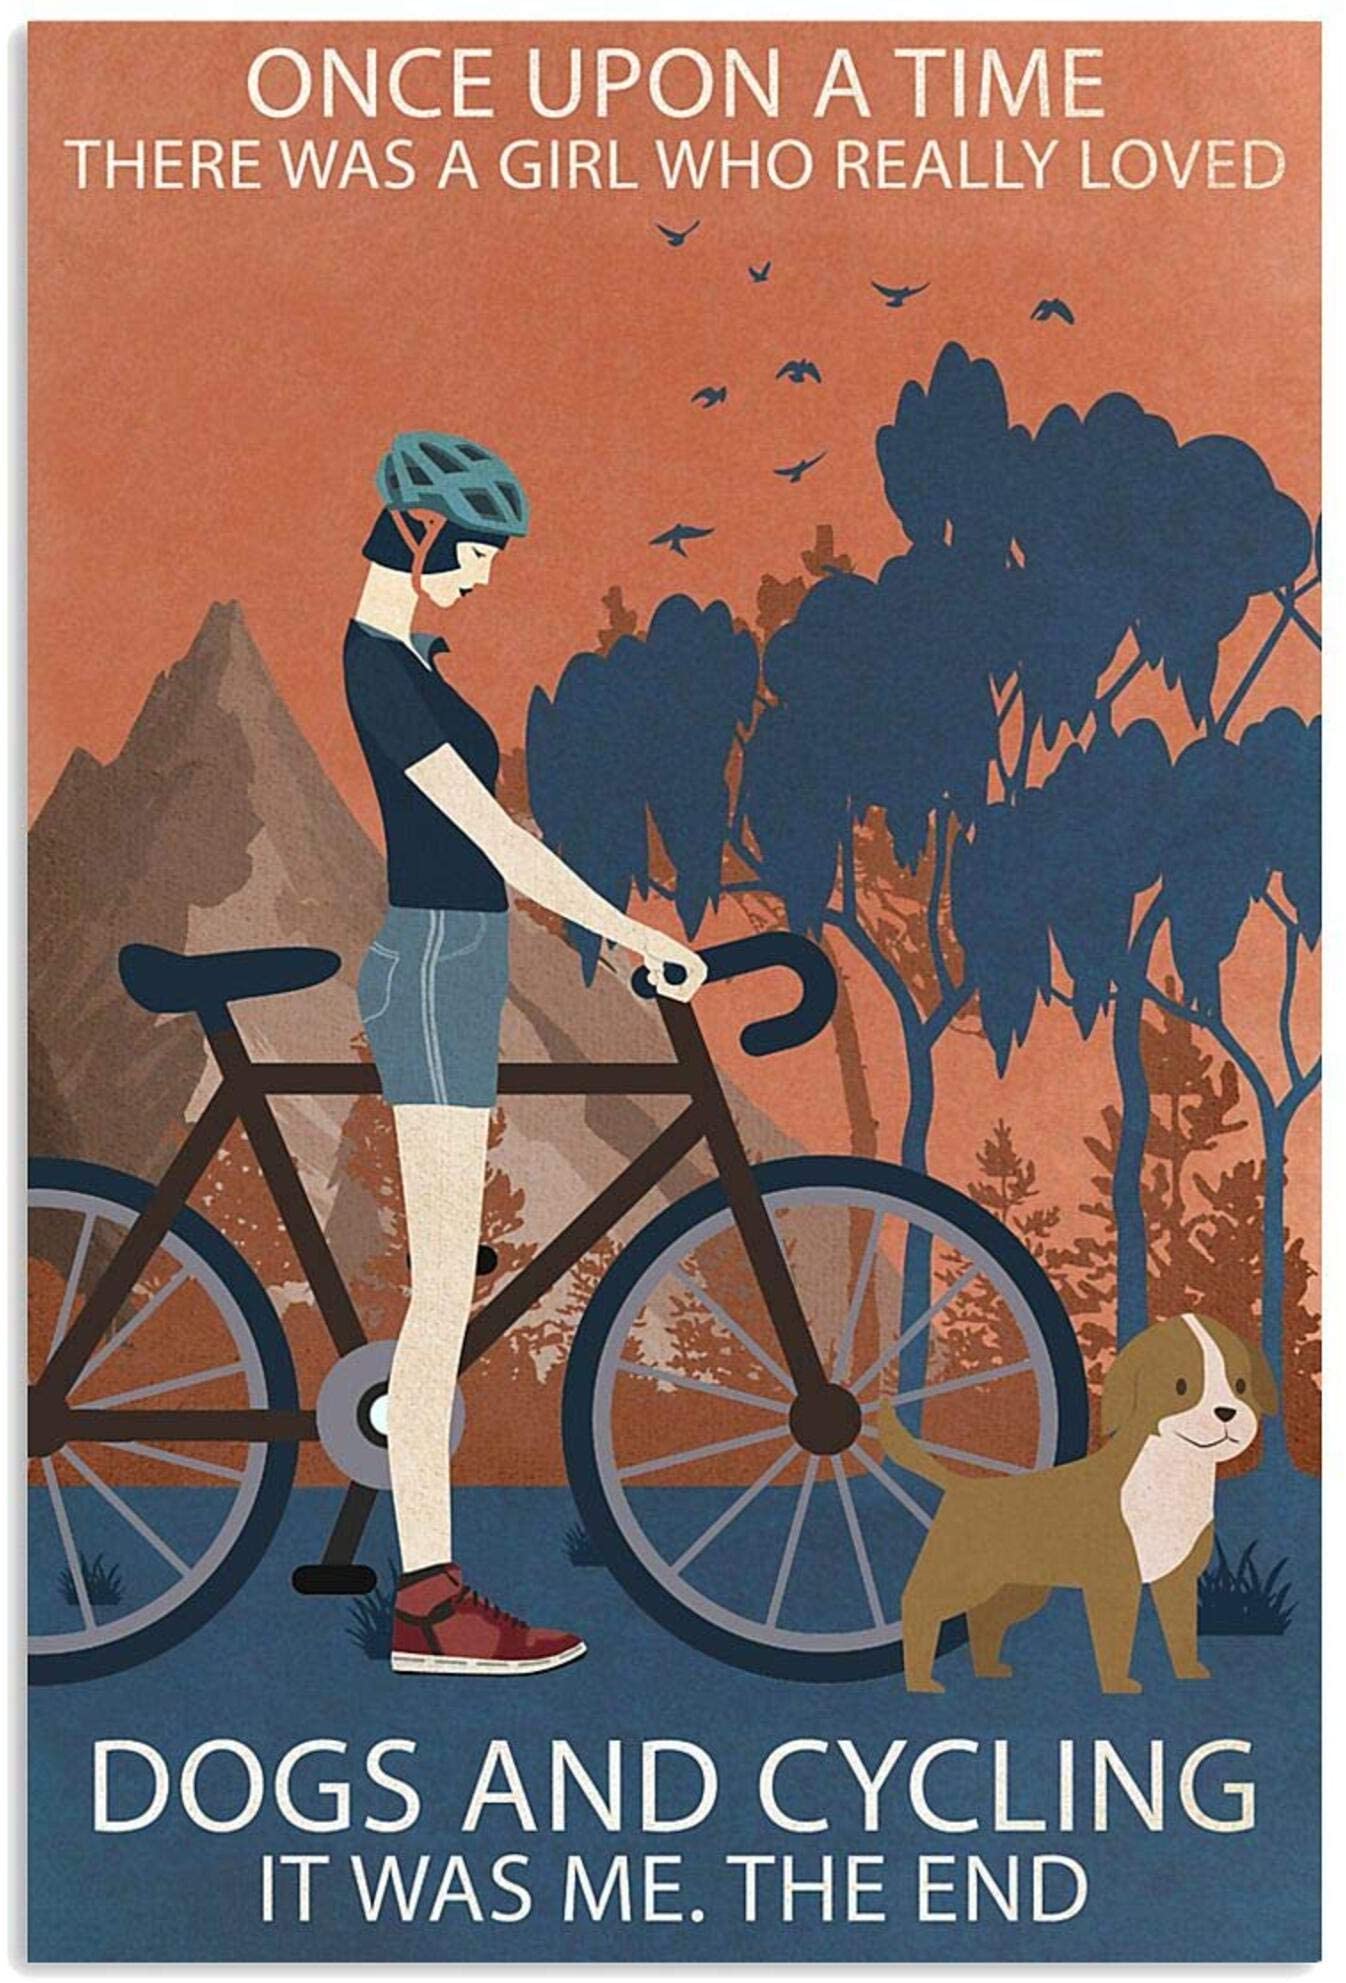 Vintage Girl Once Upon A Time Dogs And Cycling Vertical